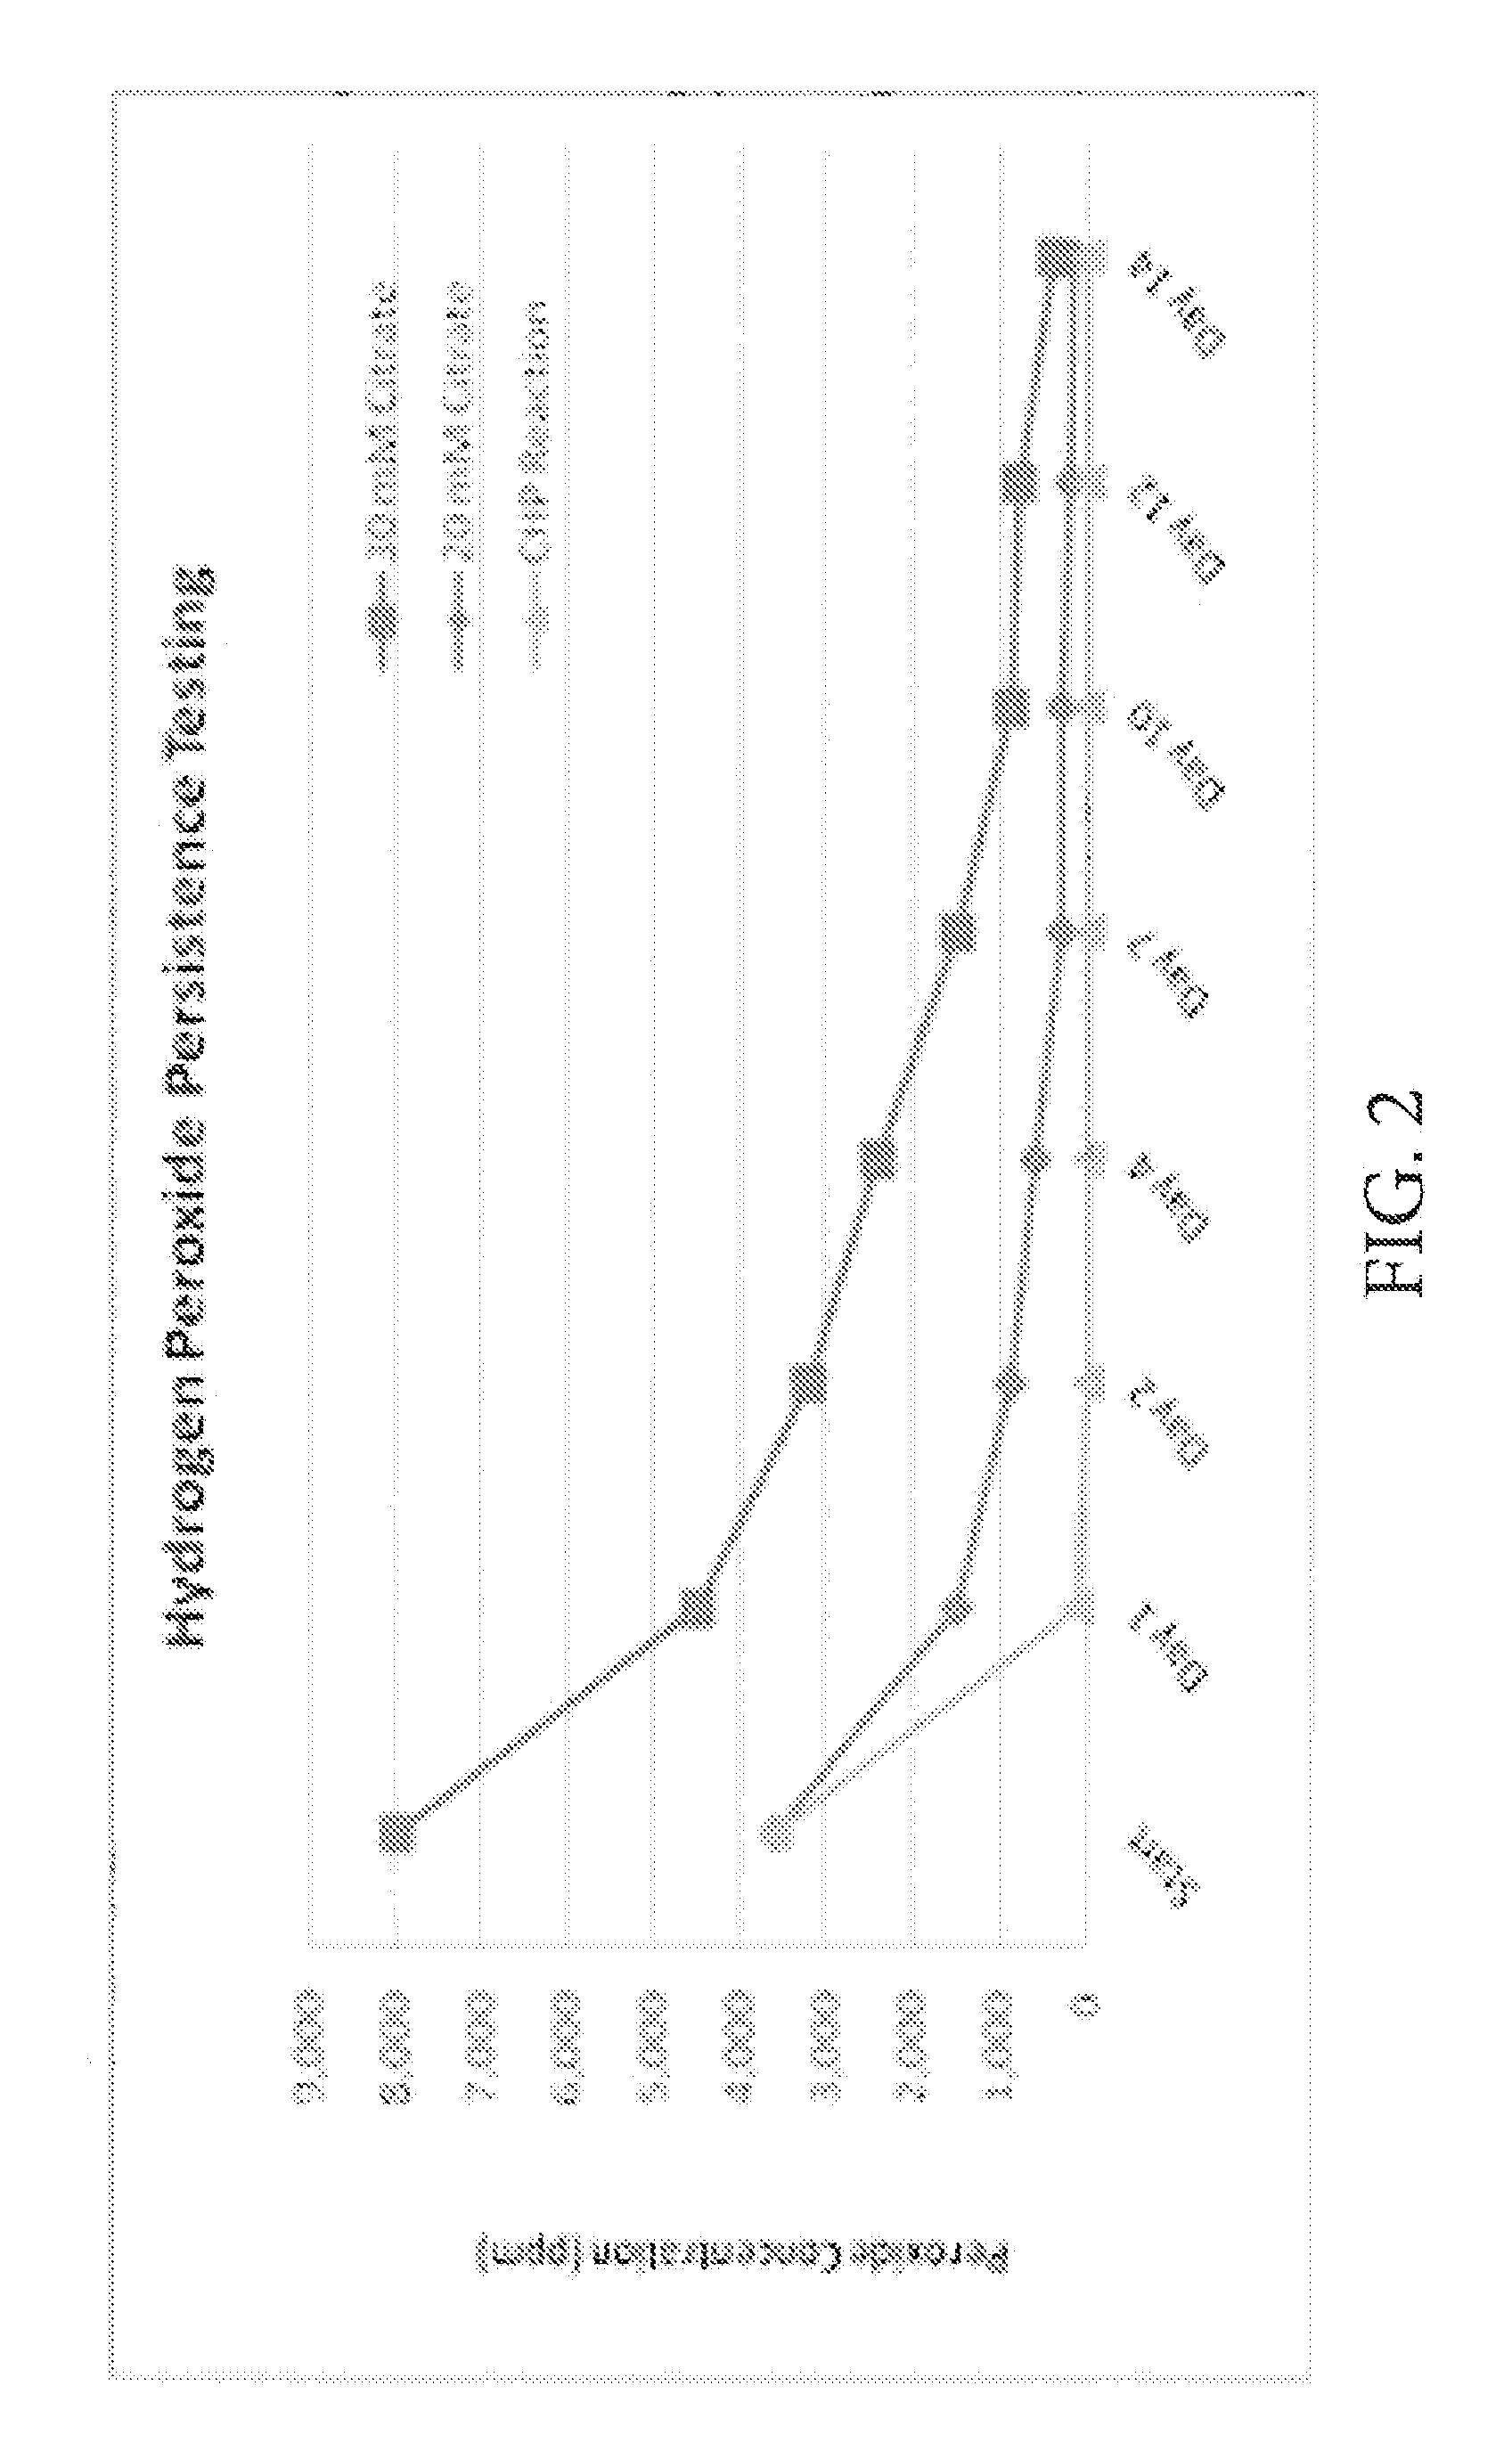 Methods of using hydrogen peroxide for in-situ chemical oxidation treatment of soil and groundwater